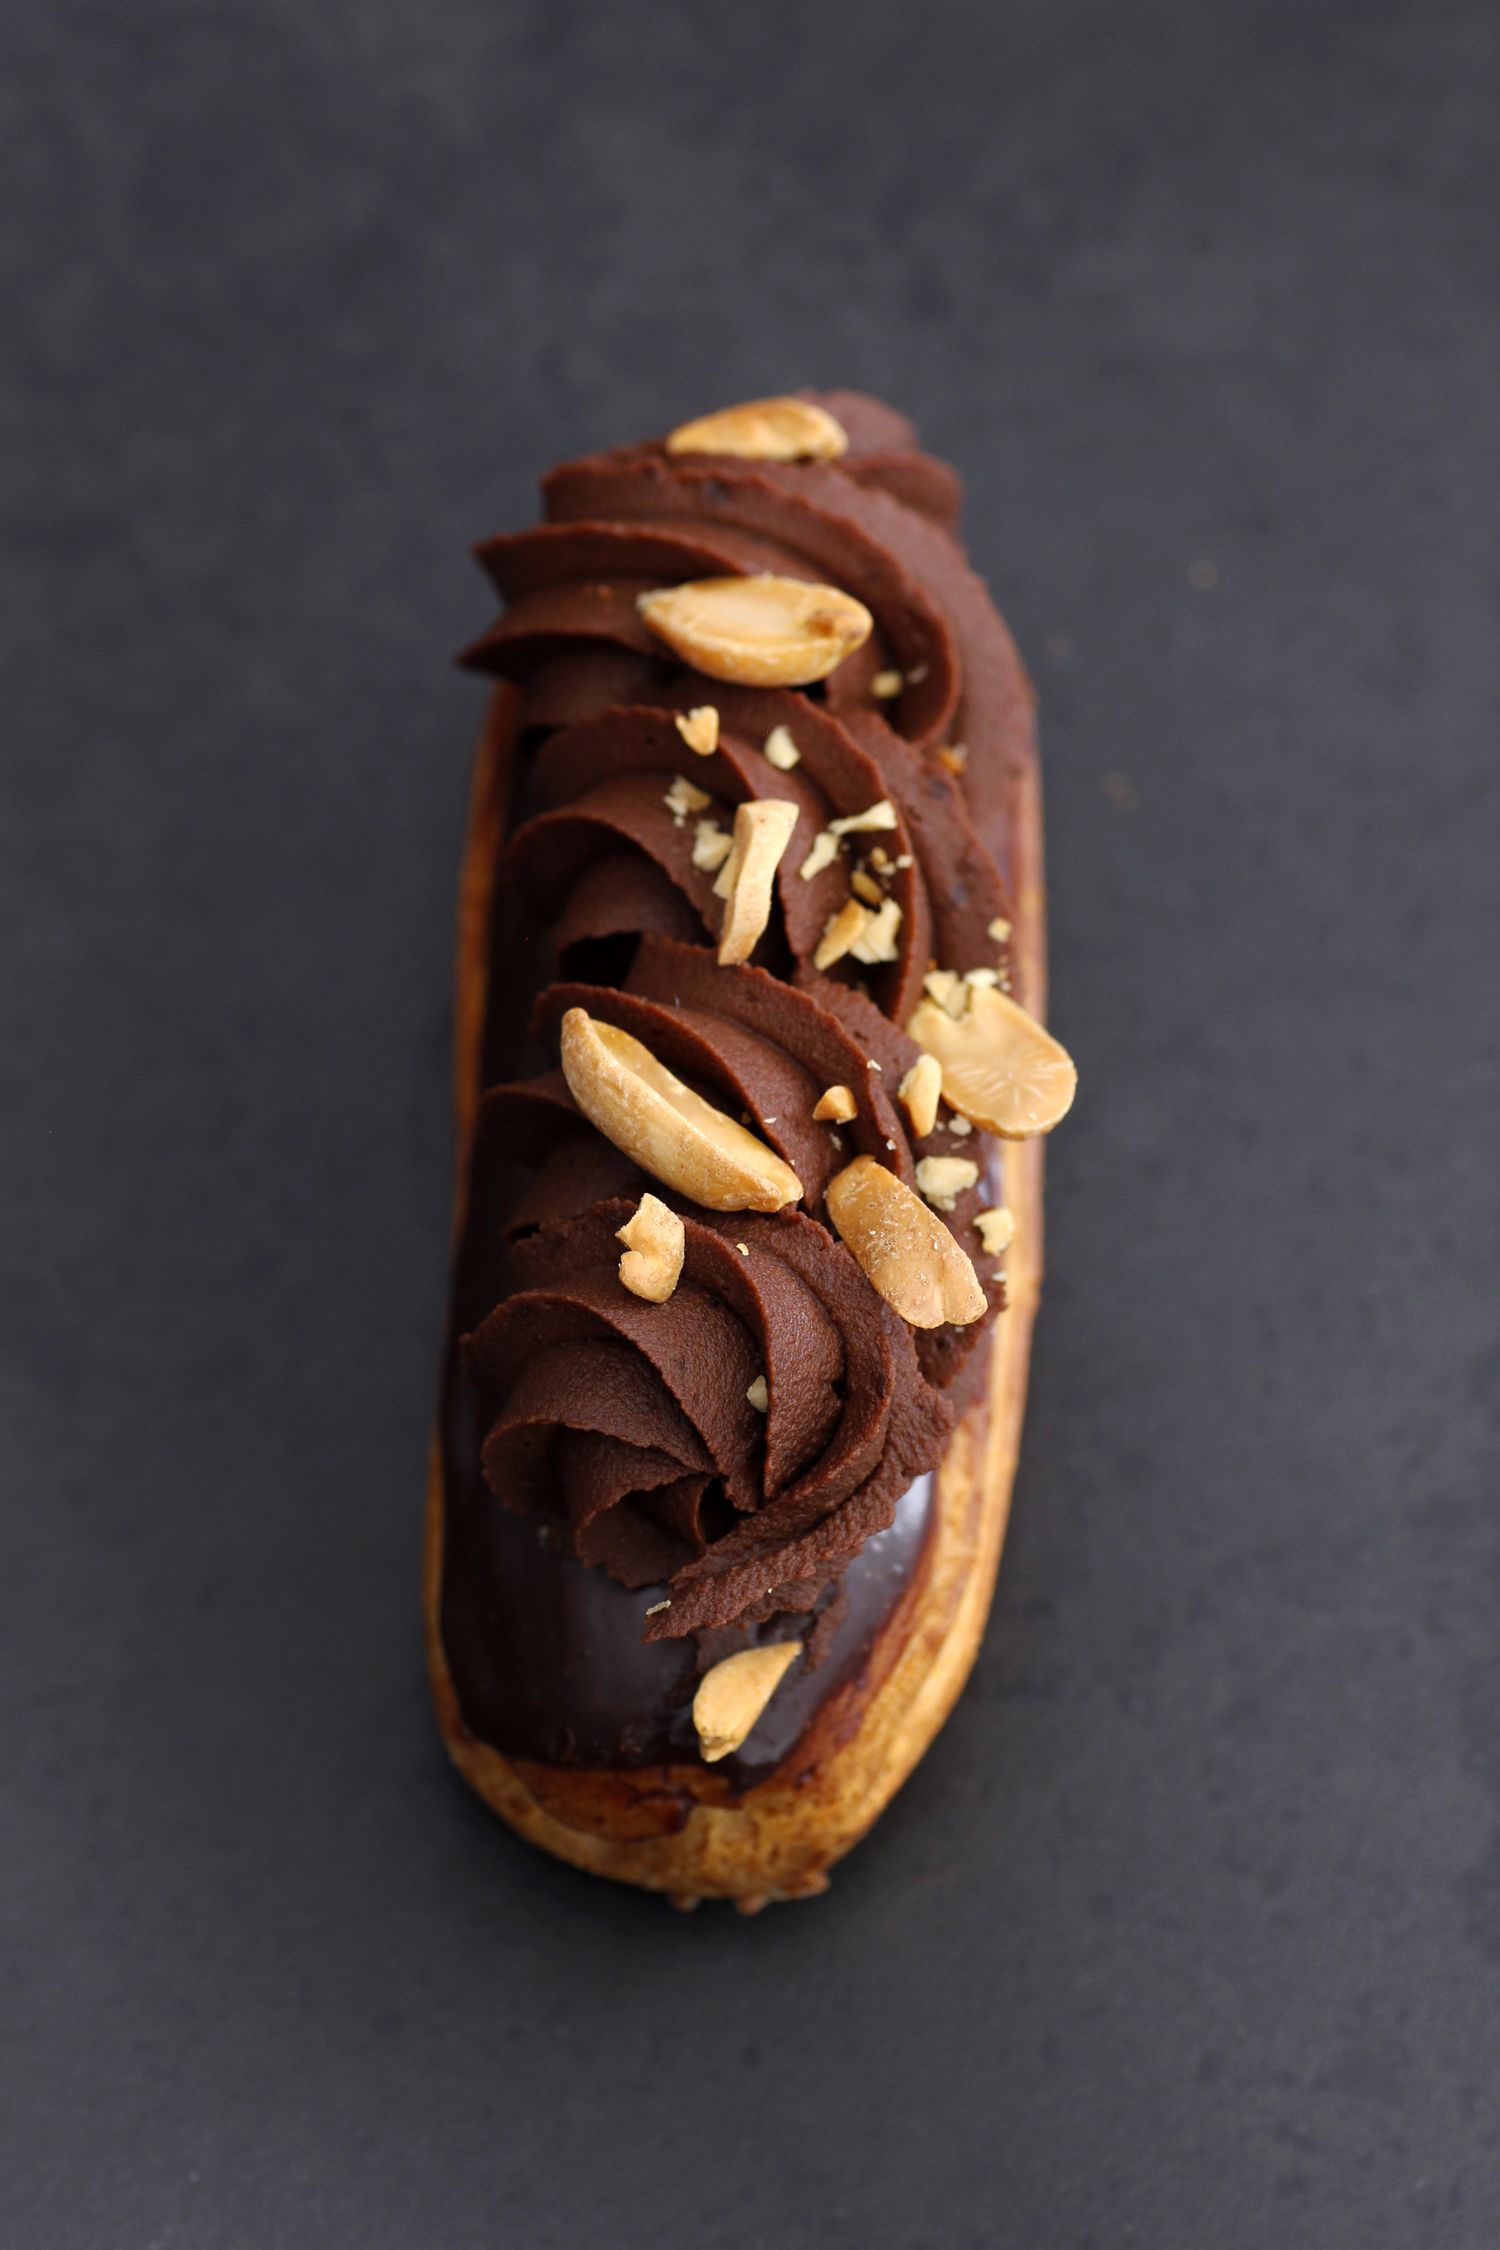 Peanut Butter Chocolate Eclairs